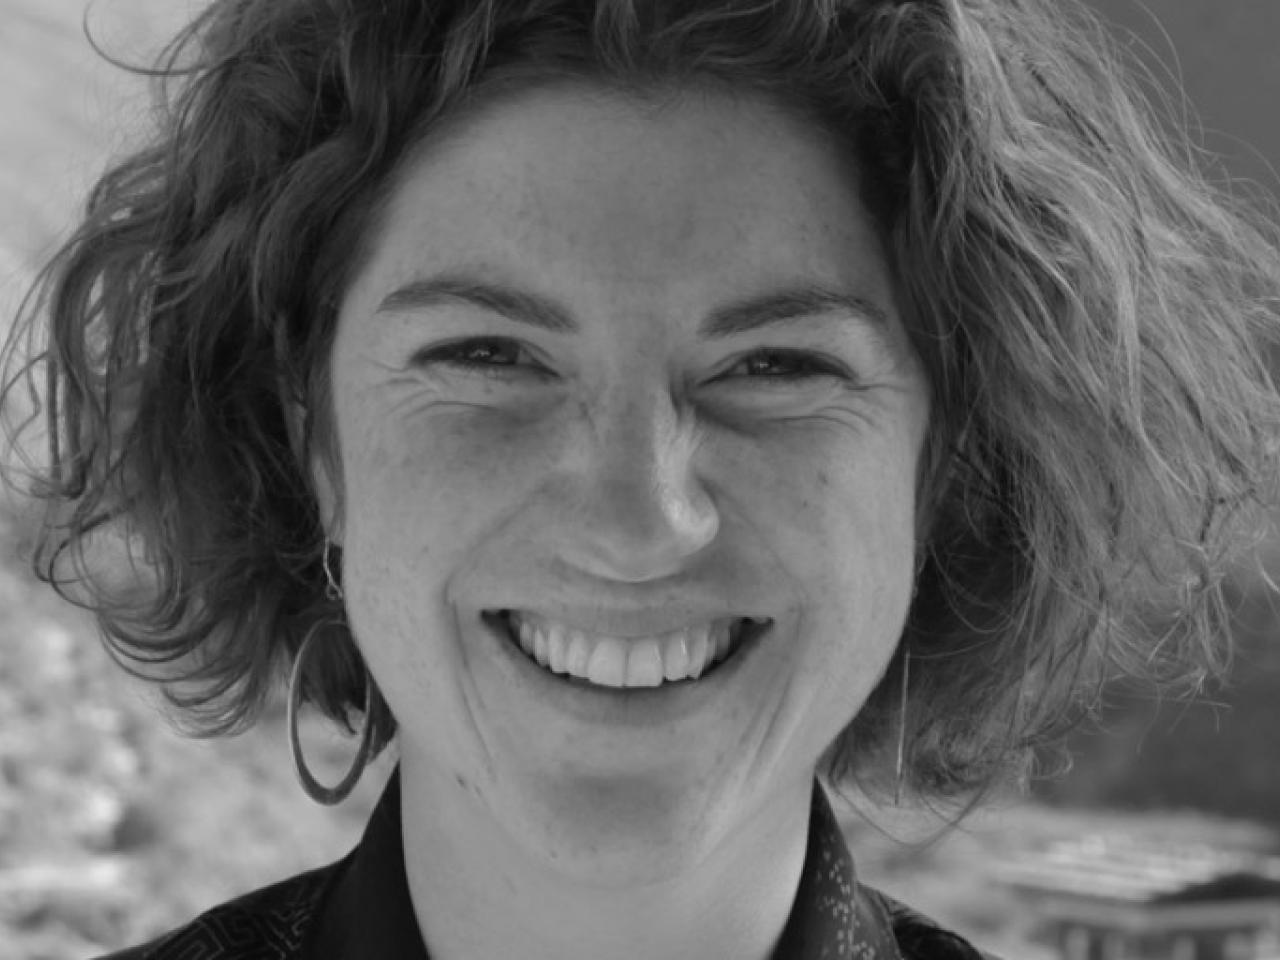 In this black and white photo, New Day filmmaker Meghan Shea looks directly at the camera and smiles widely. Her medium-length hair is above her shoulder and she wears hoop earrings.